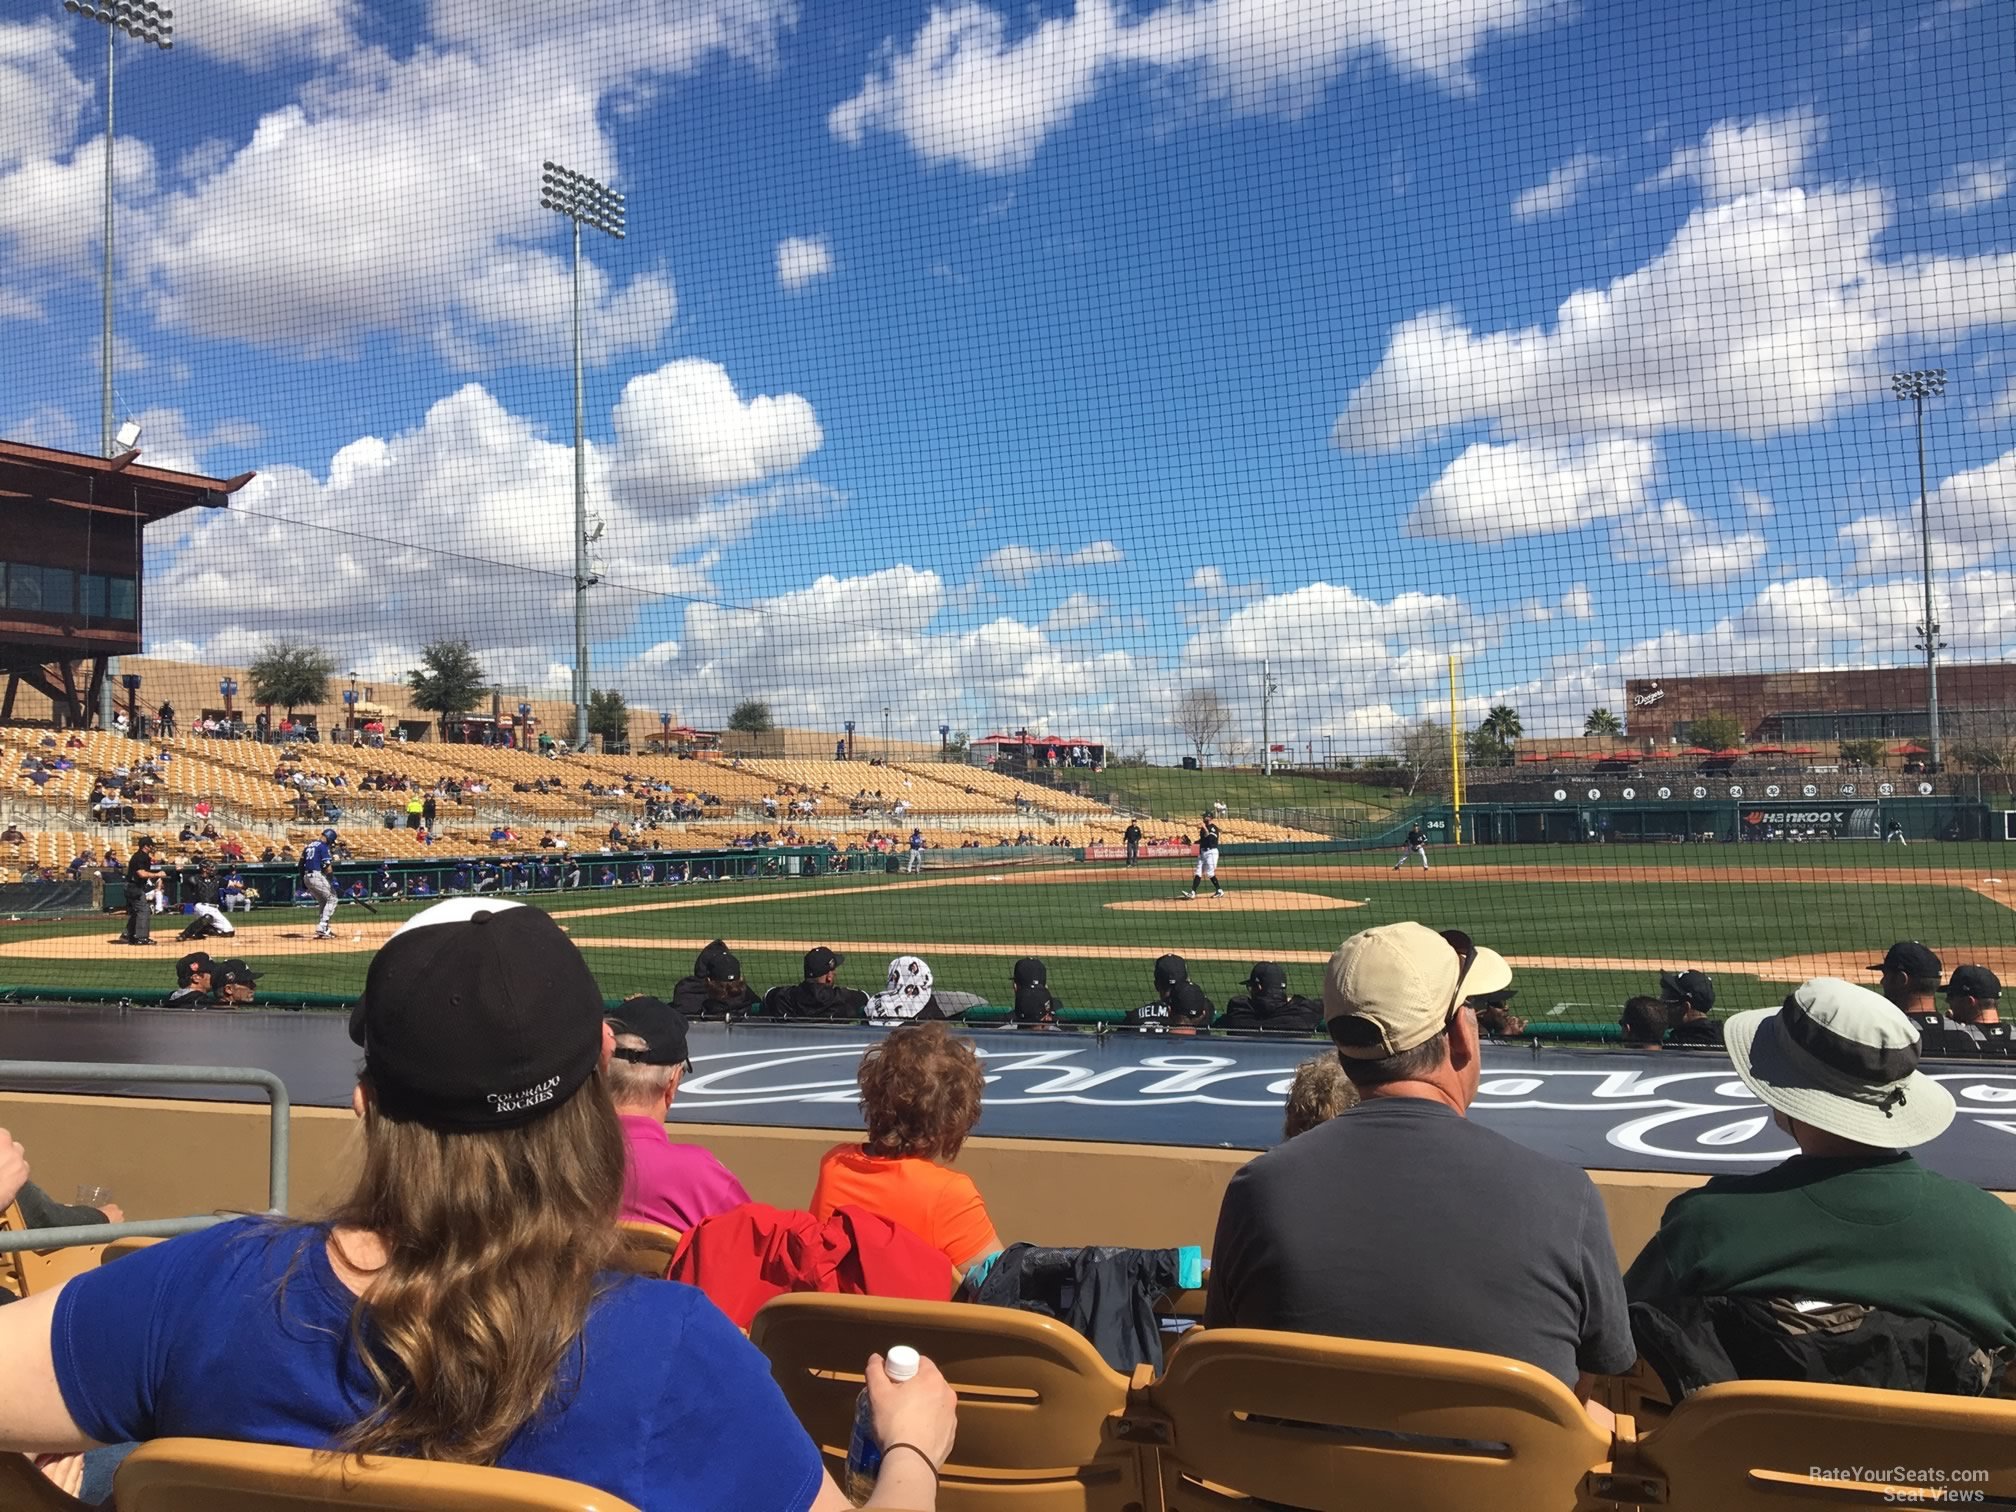 section 8, row 6 seat view  - camelback ranch